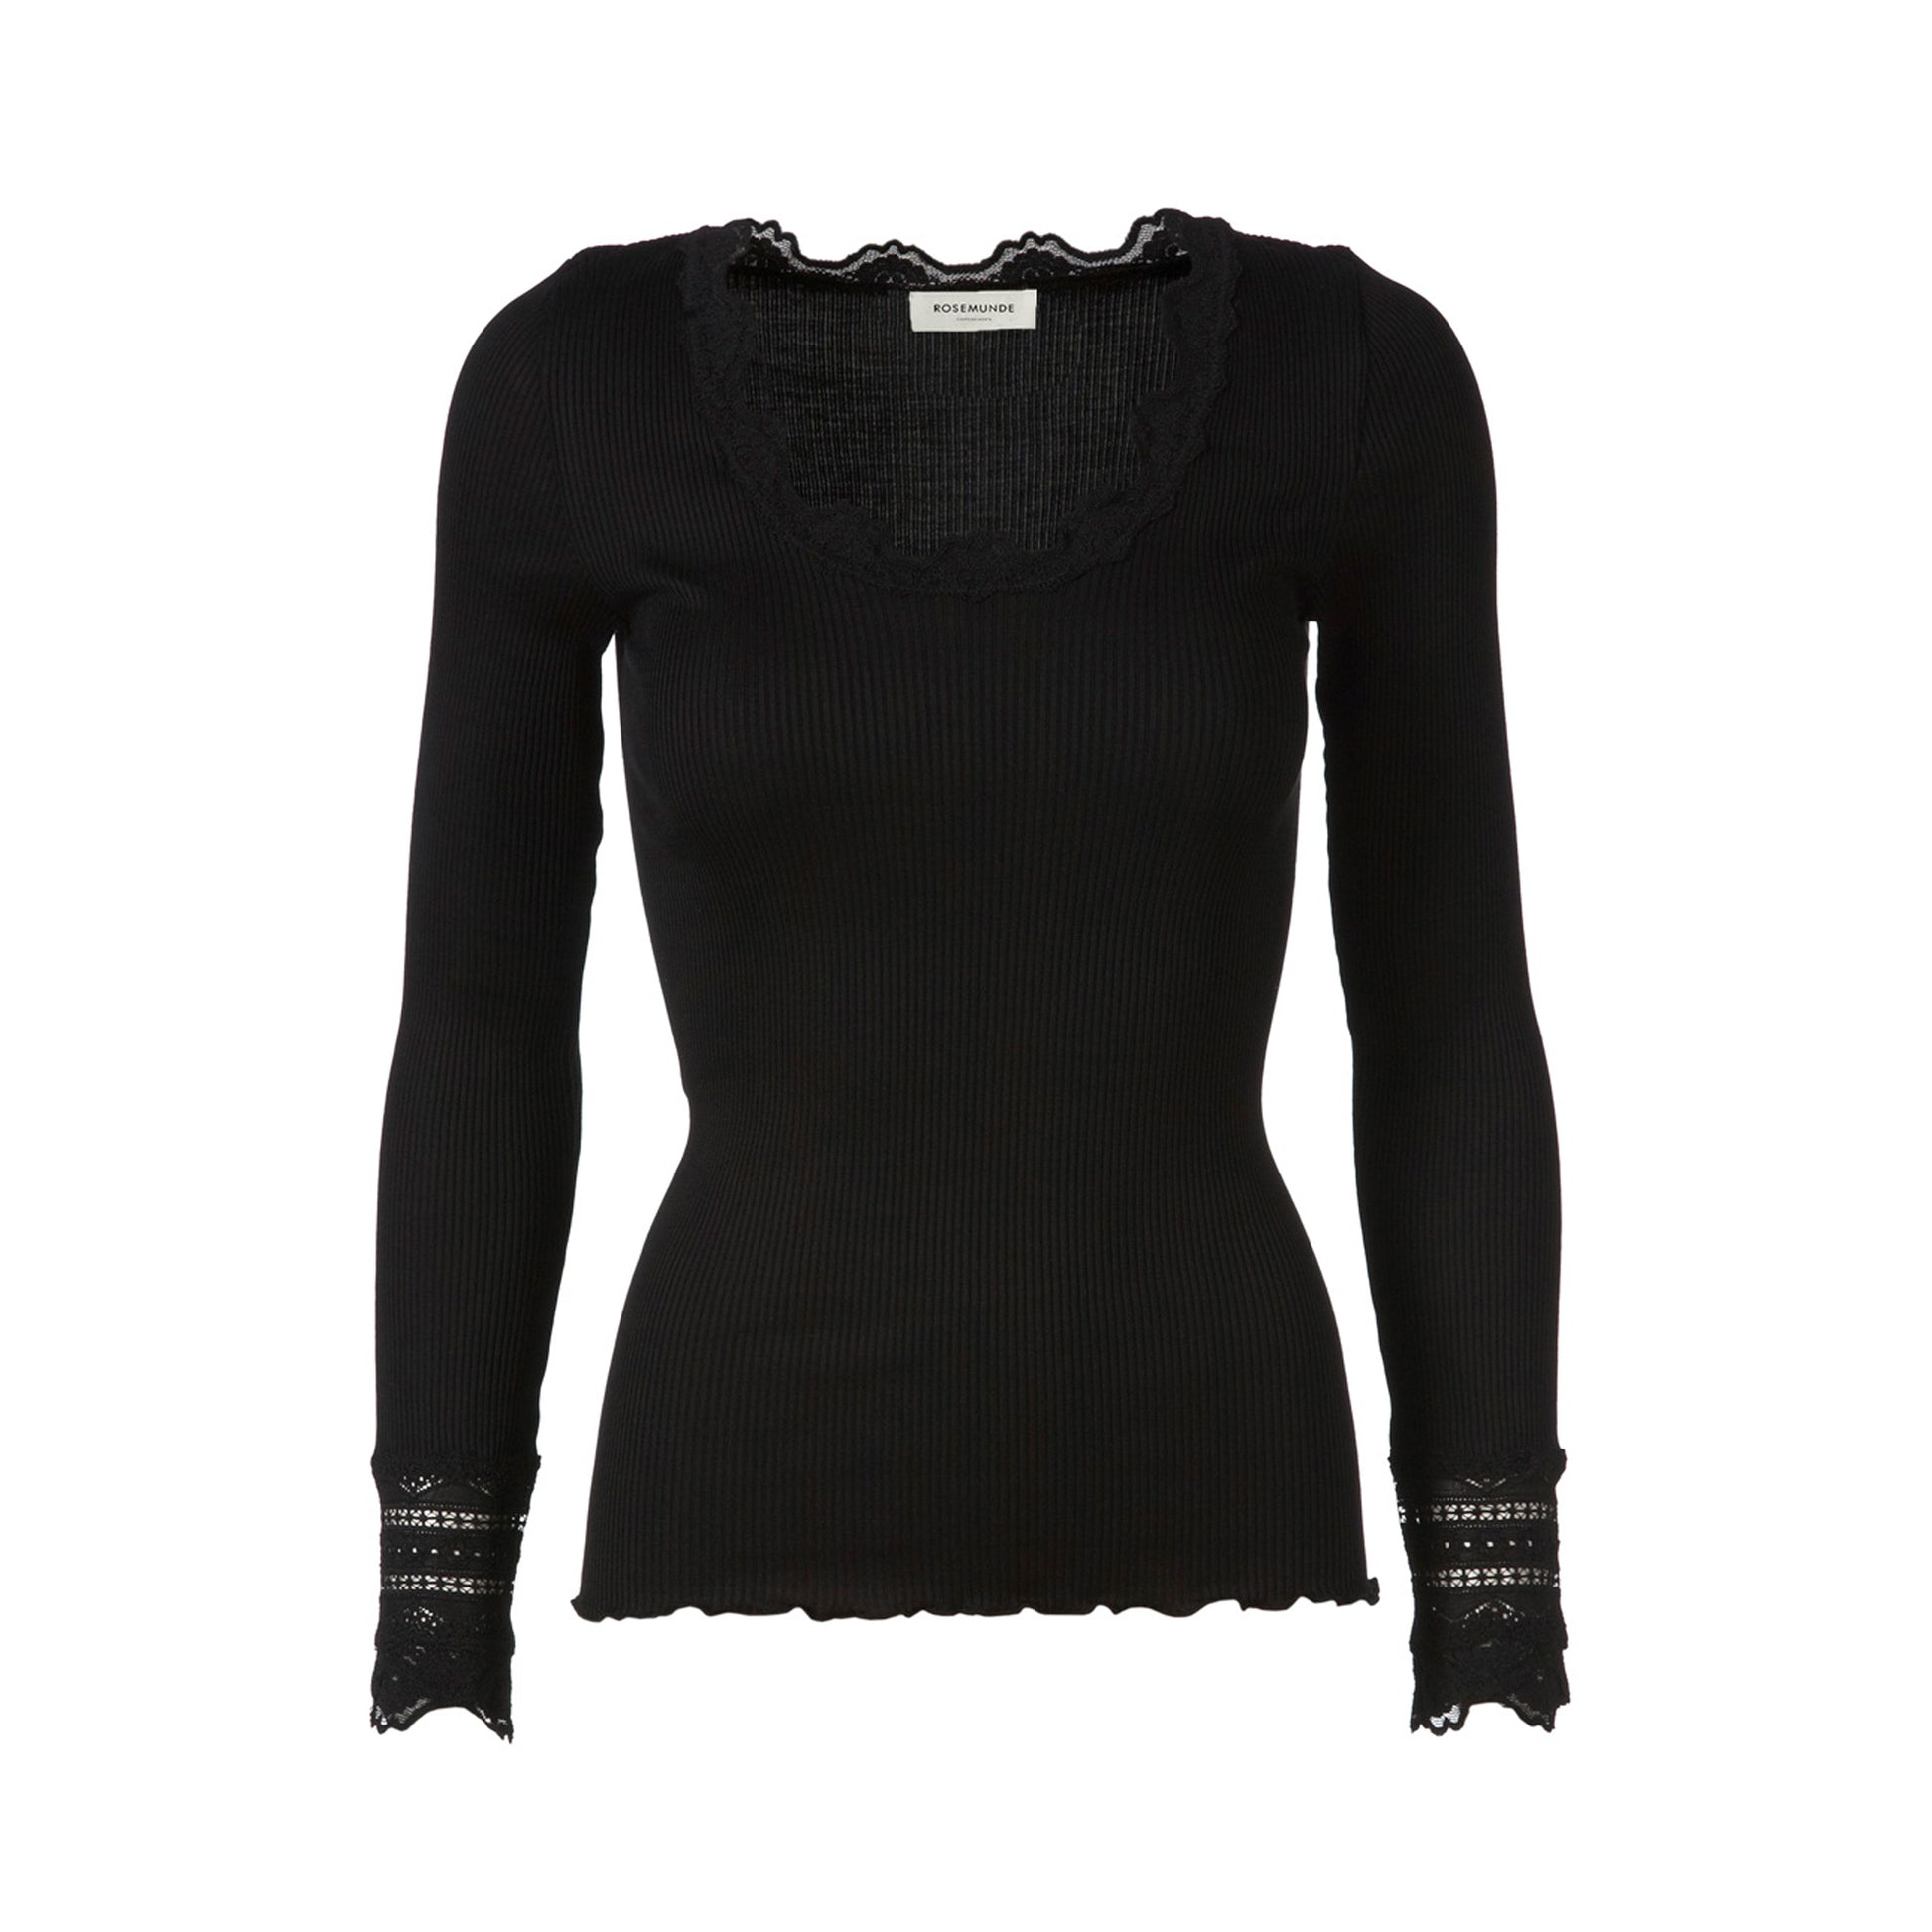 product shot of Rosemunde long sleeved black ribbed top wit lace trims 